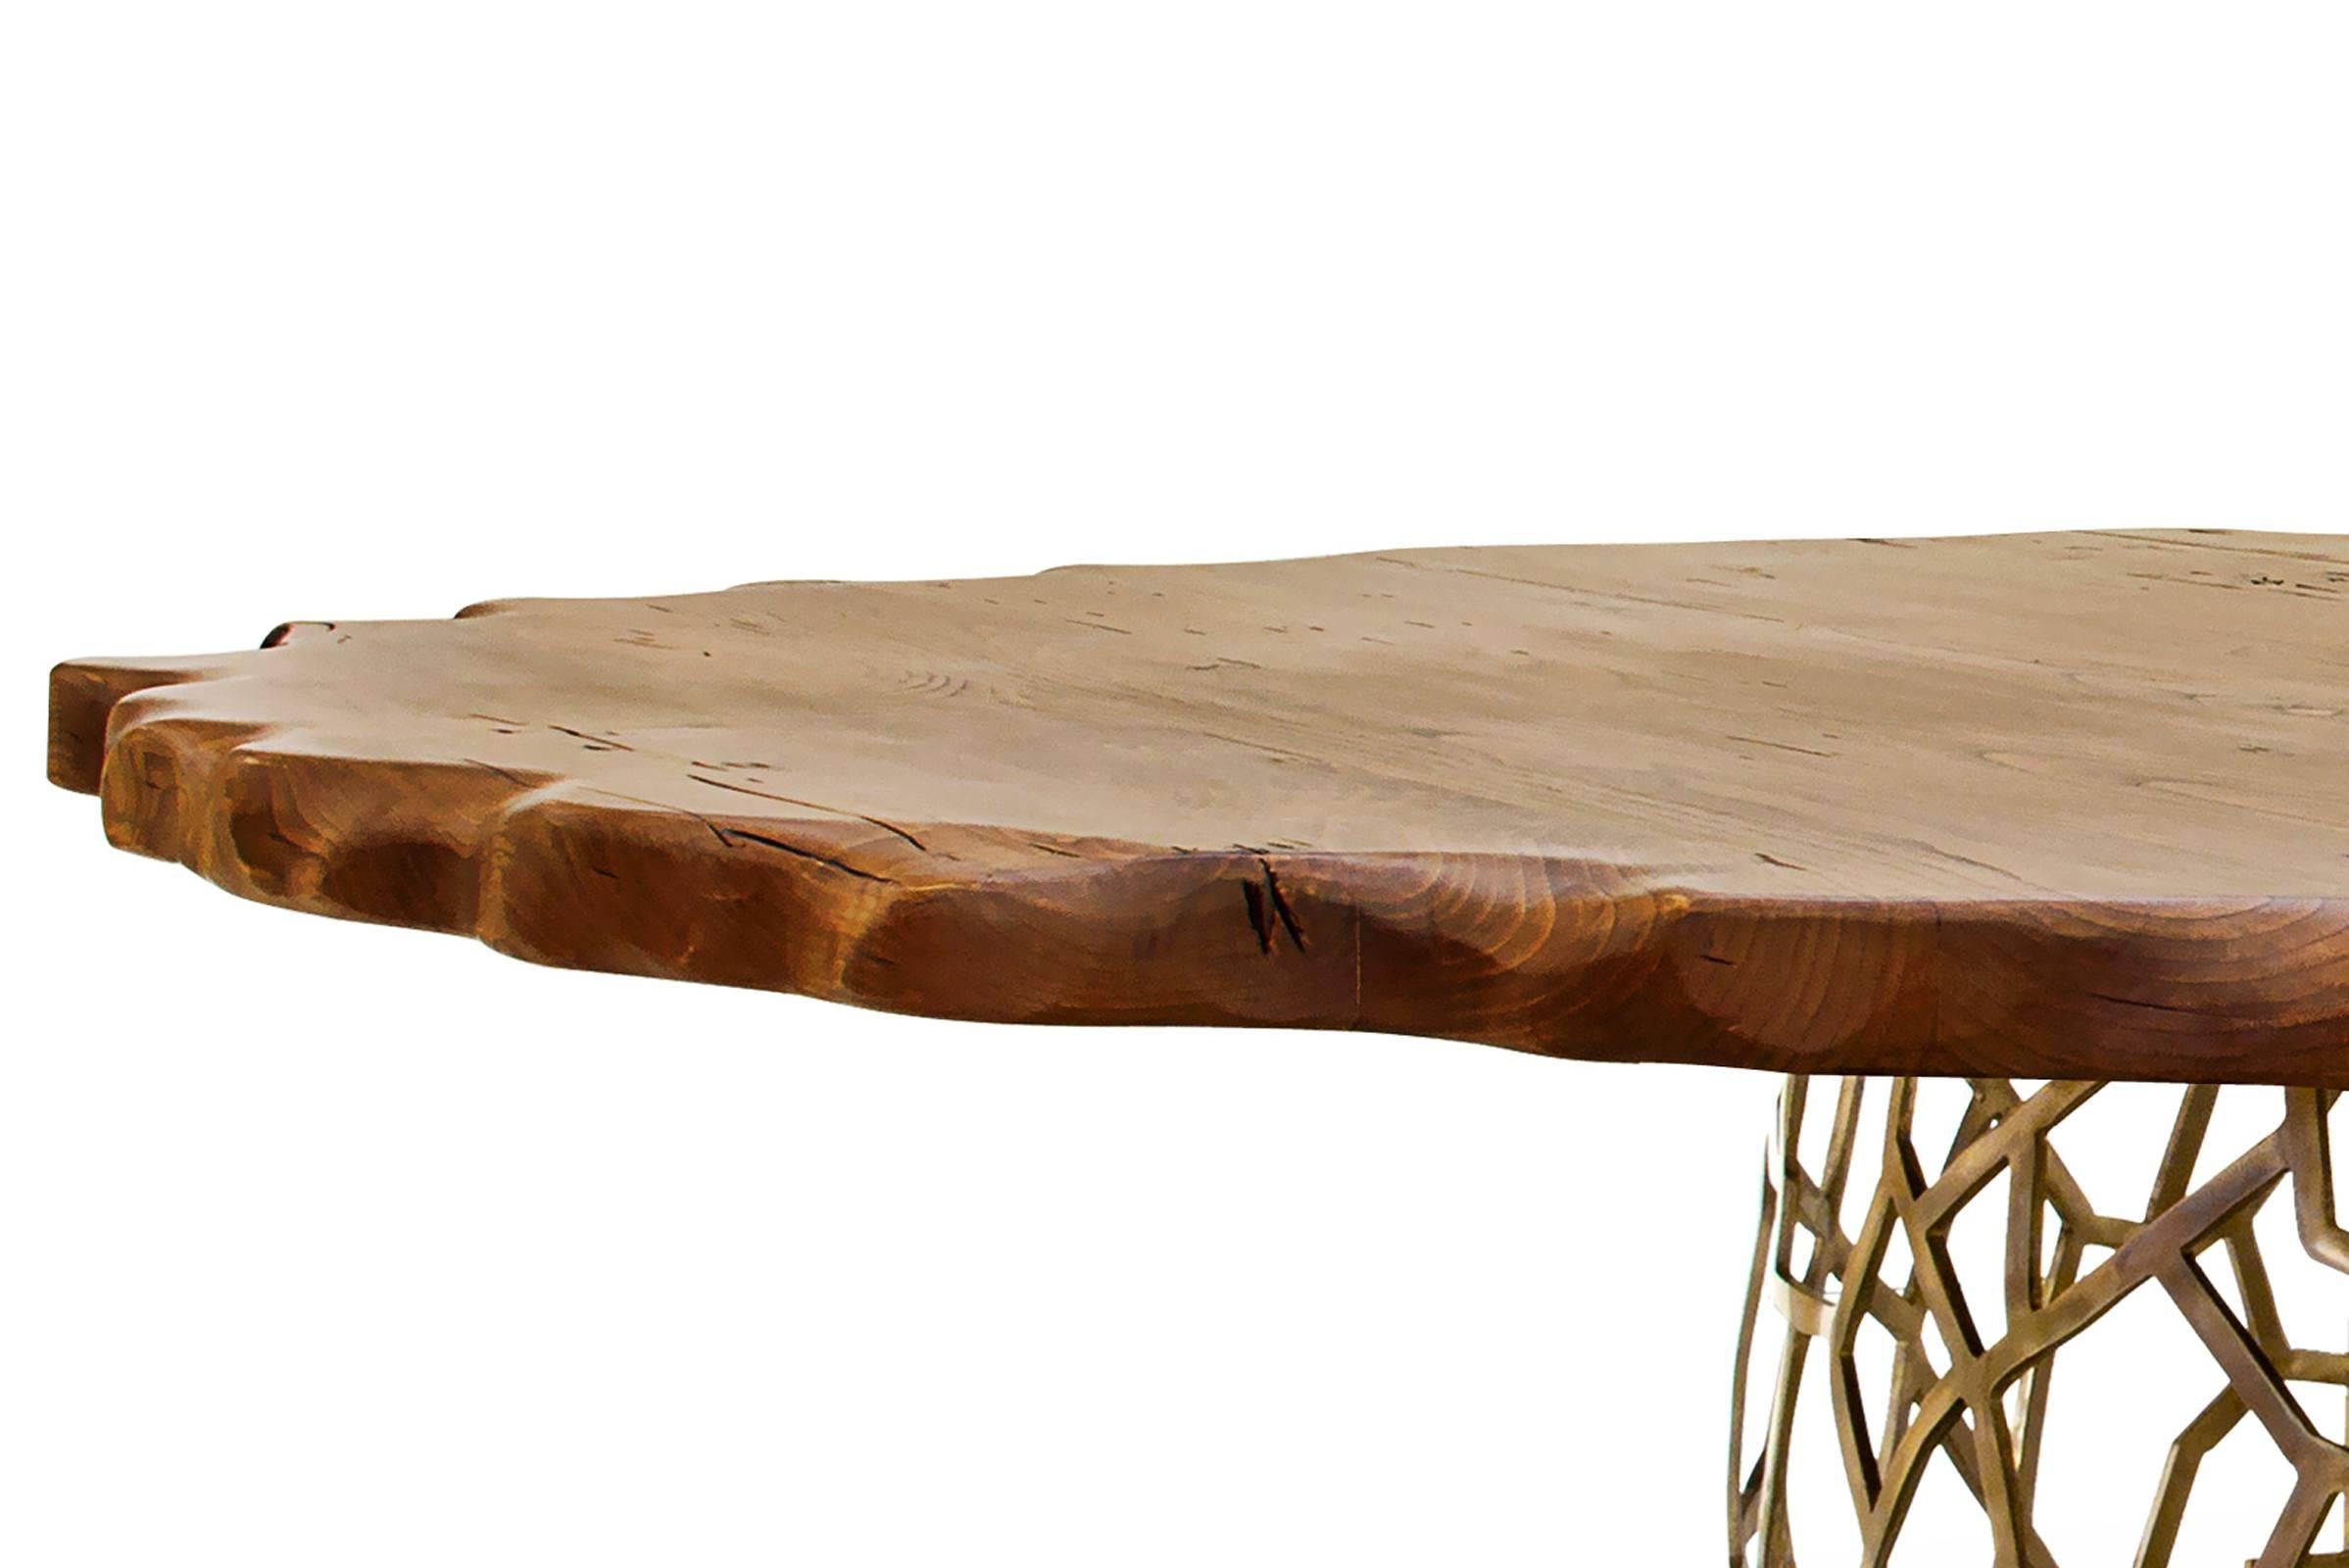 Dining table Pisa aged brass big with stained oak top
and handcrafted aged brass structure base.
